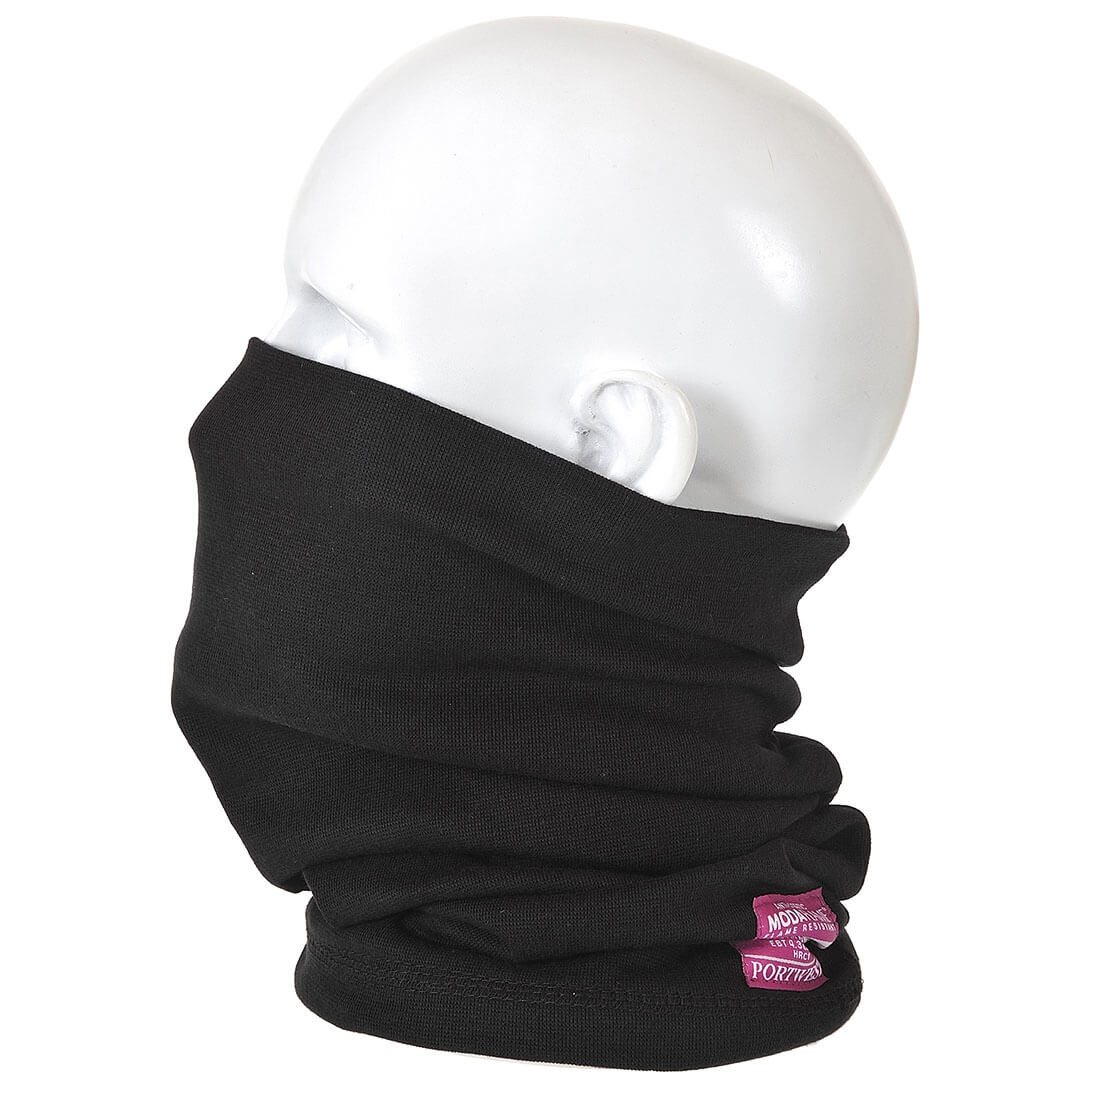 Flame - Resistant Anti-Static Neck Tube - Safetywear